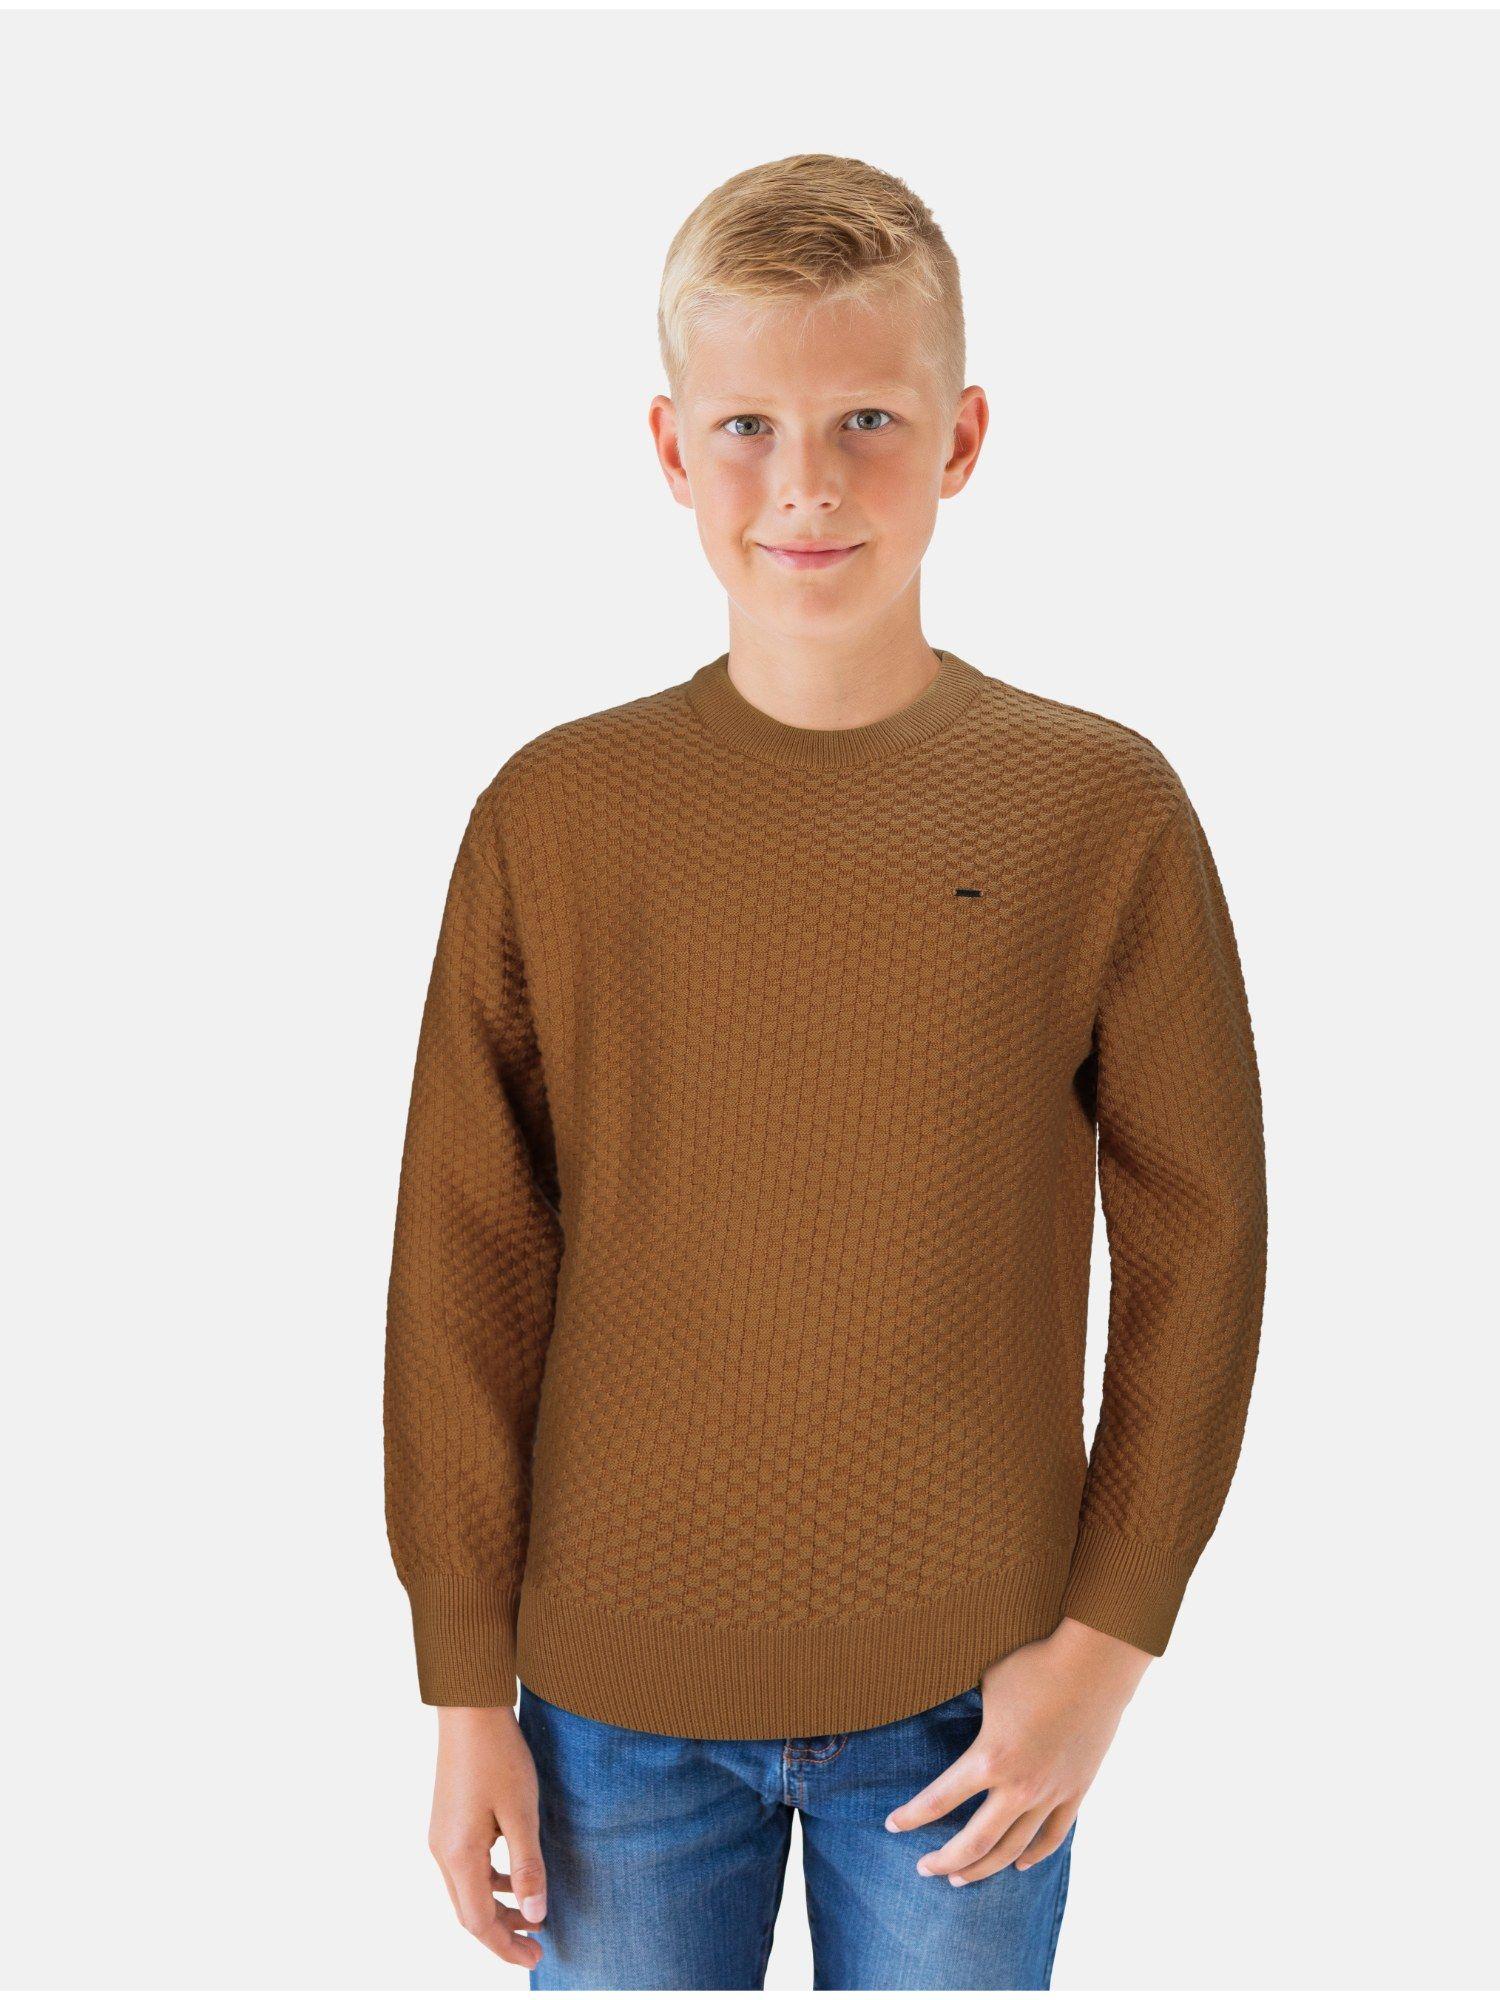 boys-brown-woven-solid-sweater-full-sleeves